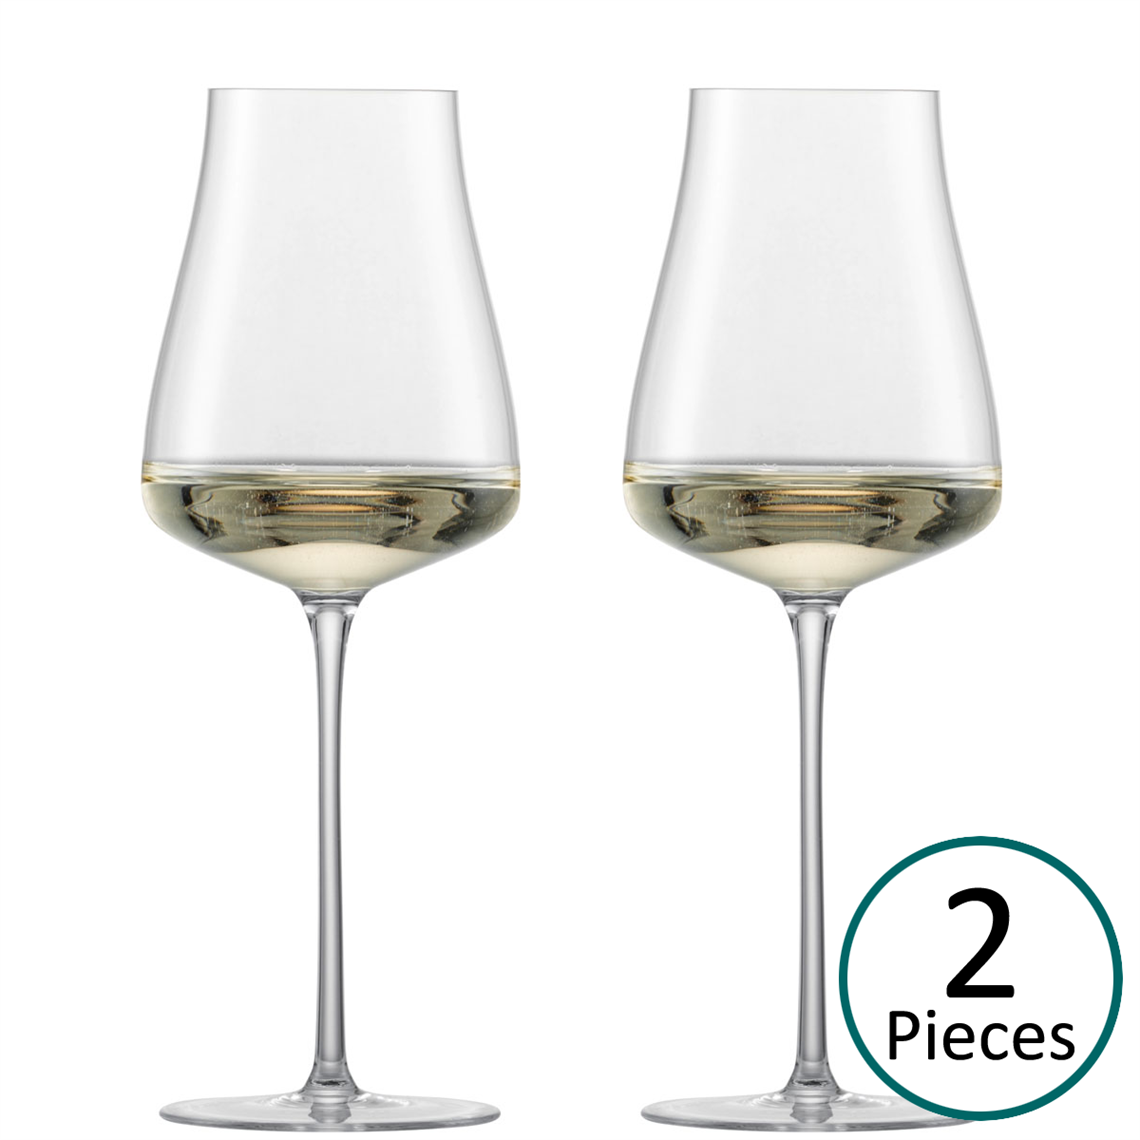 Zwiesel 1872 The Moment Riesling Glass - Set of 2